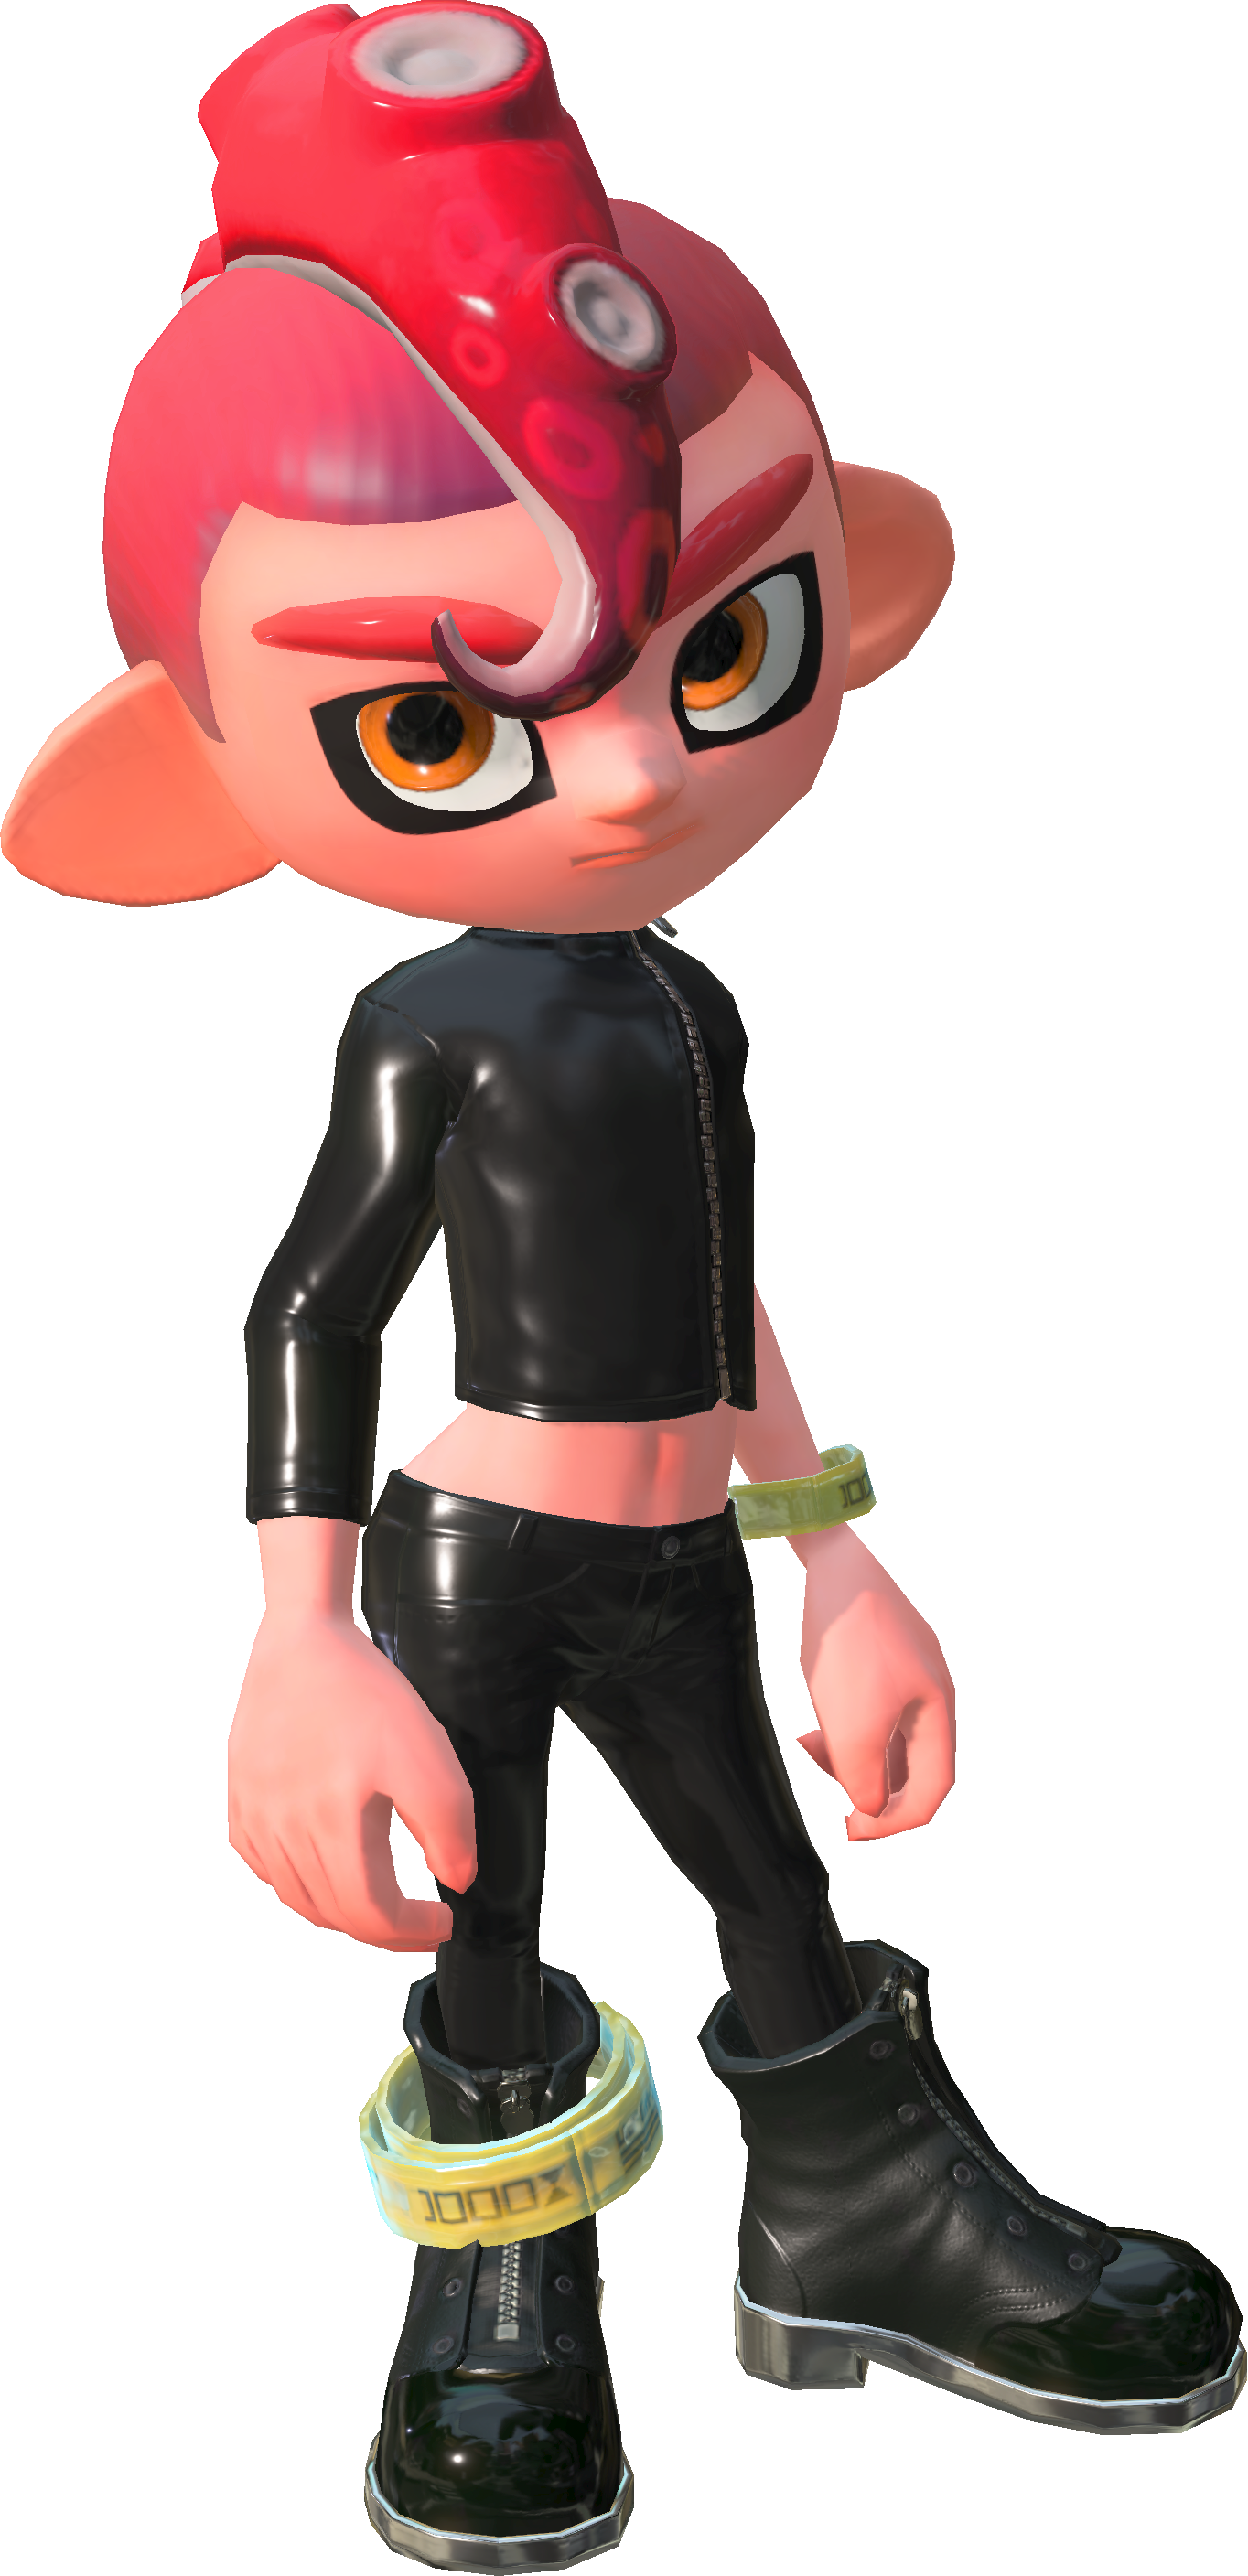 Agent 8 boy Octo Expansion.png. 